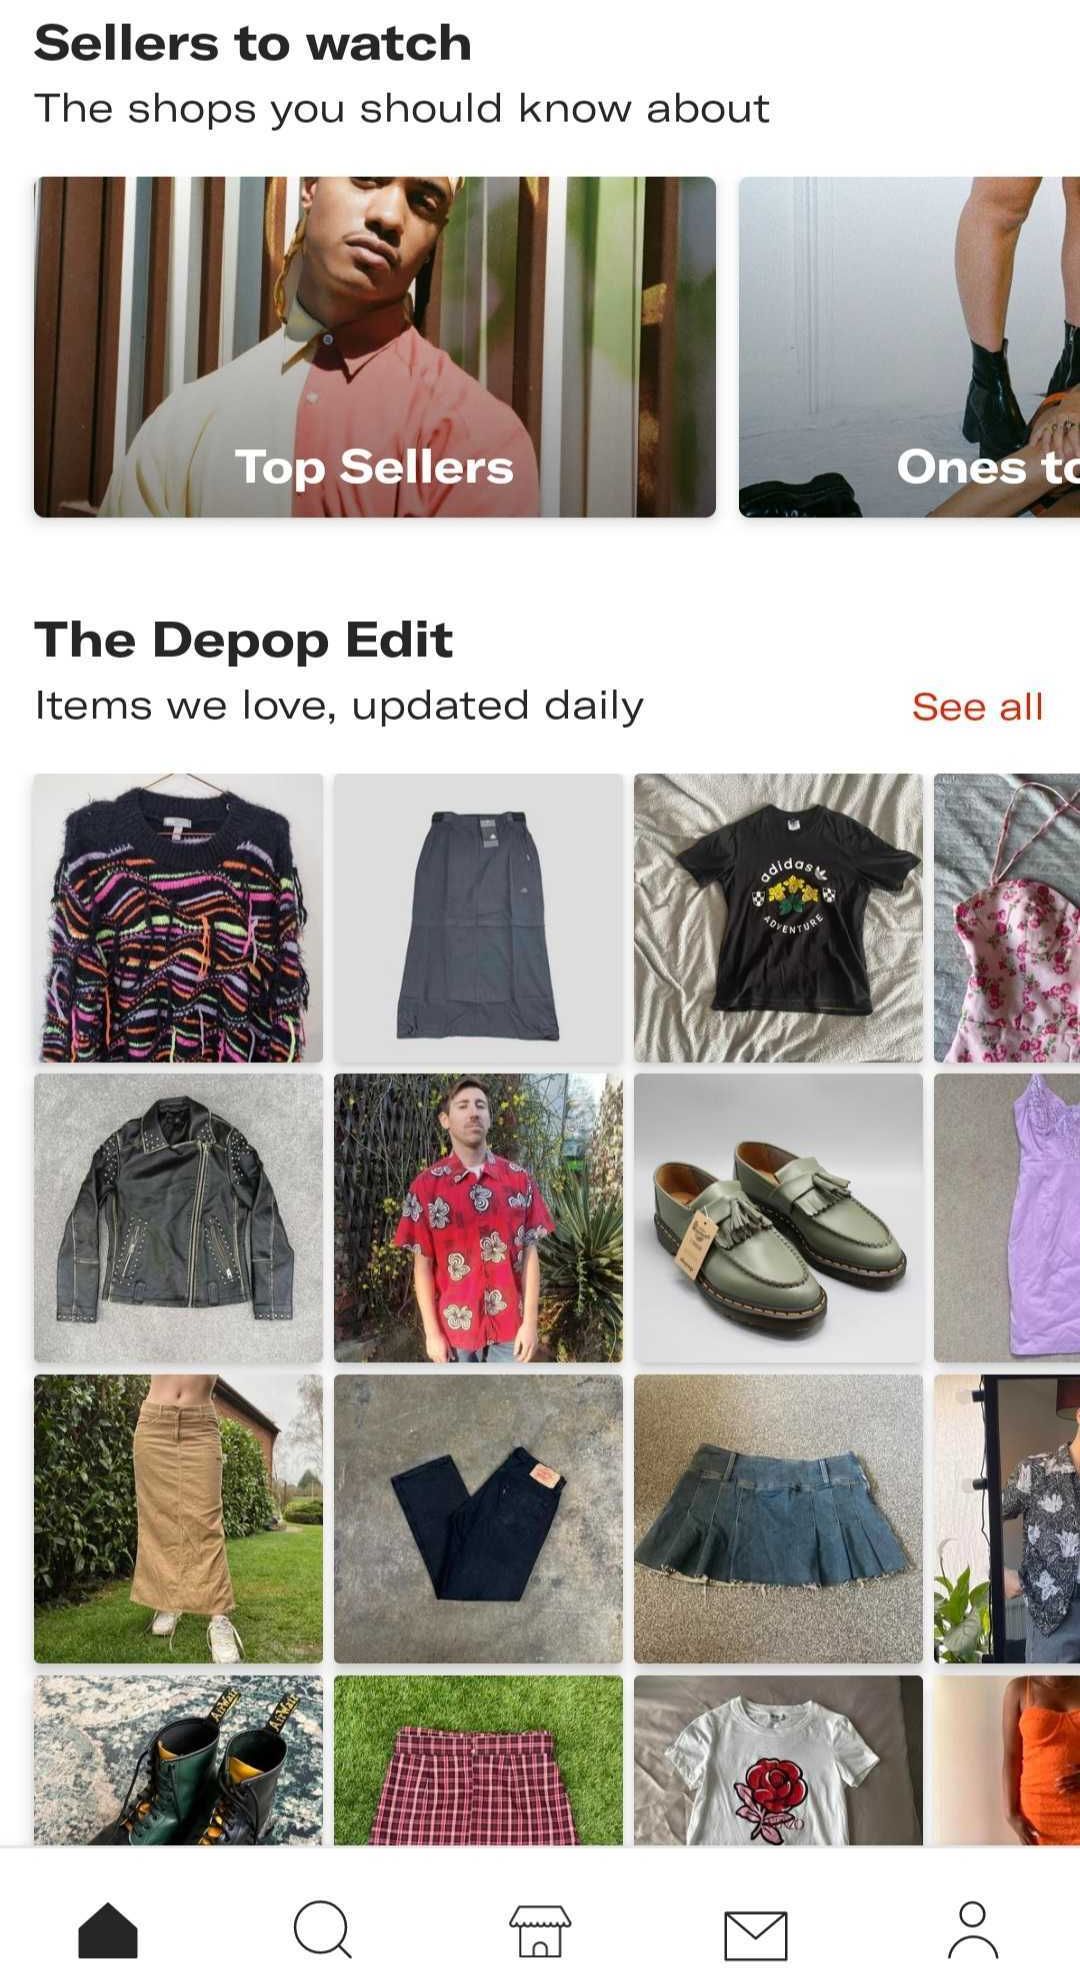 Vinted vs Depop vs Poshmark - What to Sell for the Largest Profit - Zipsale